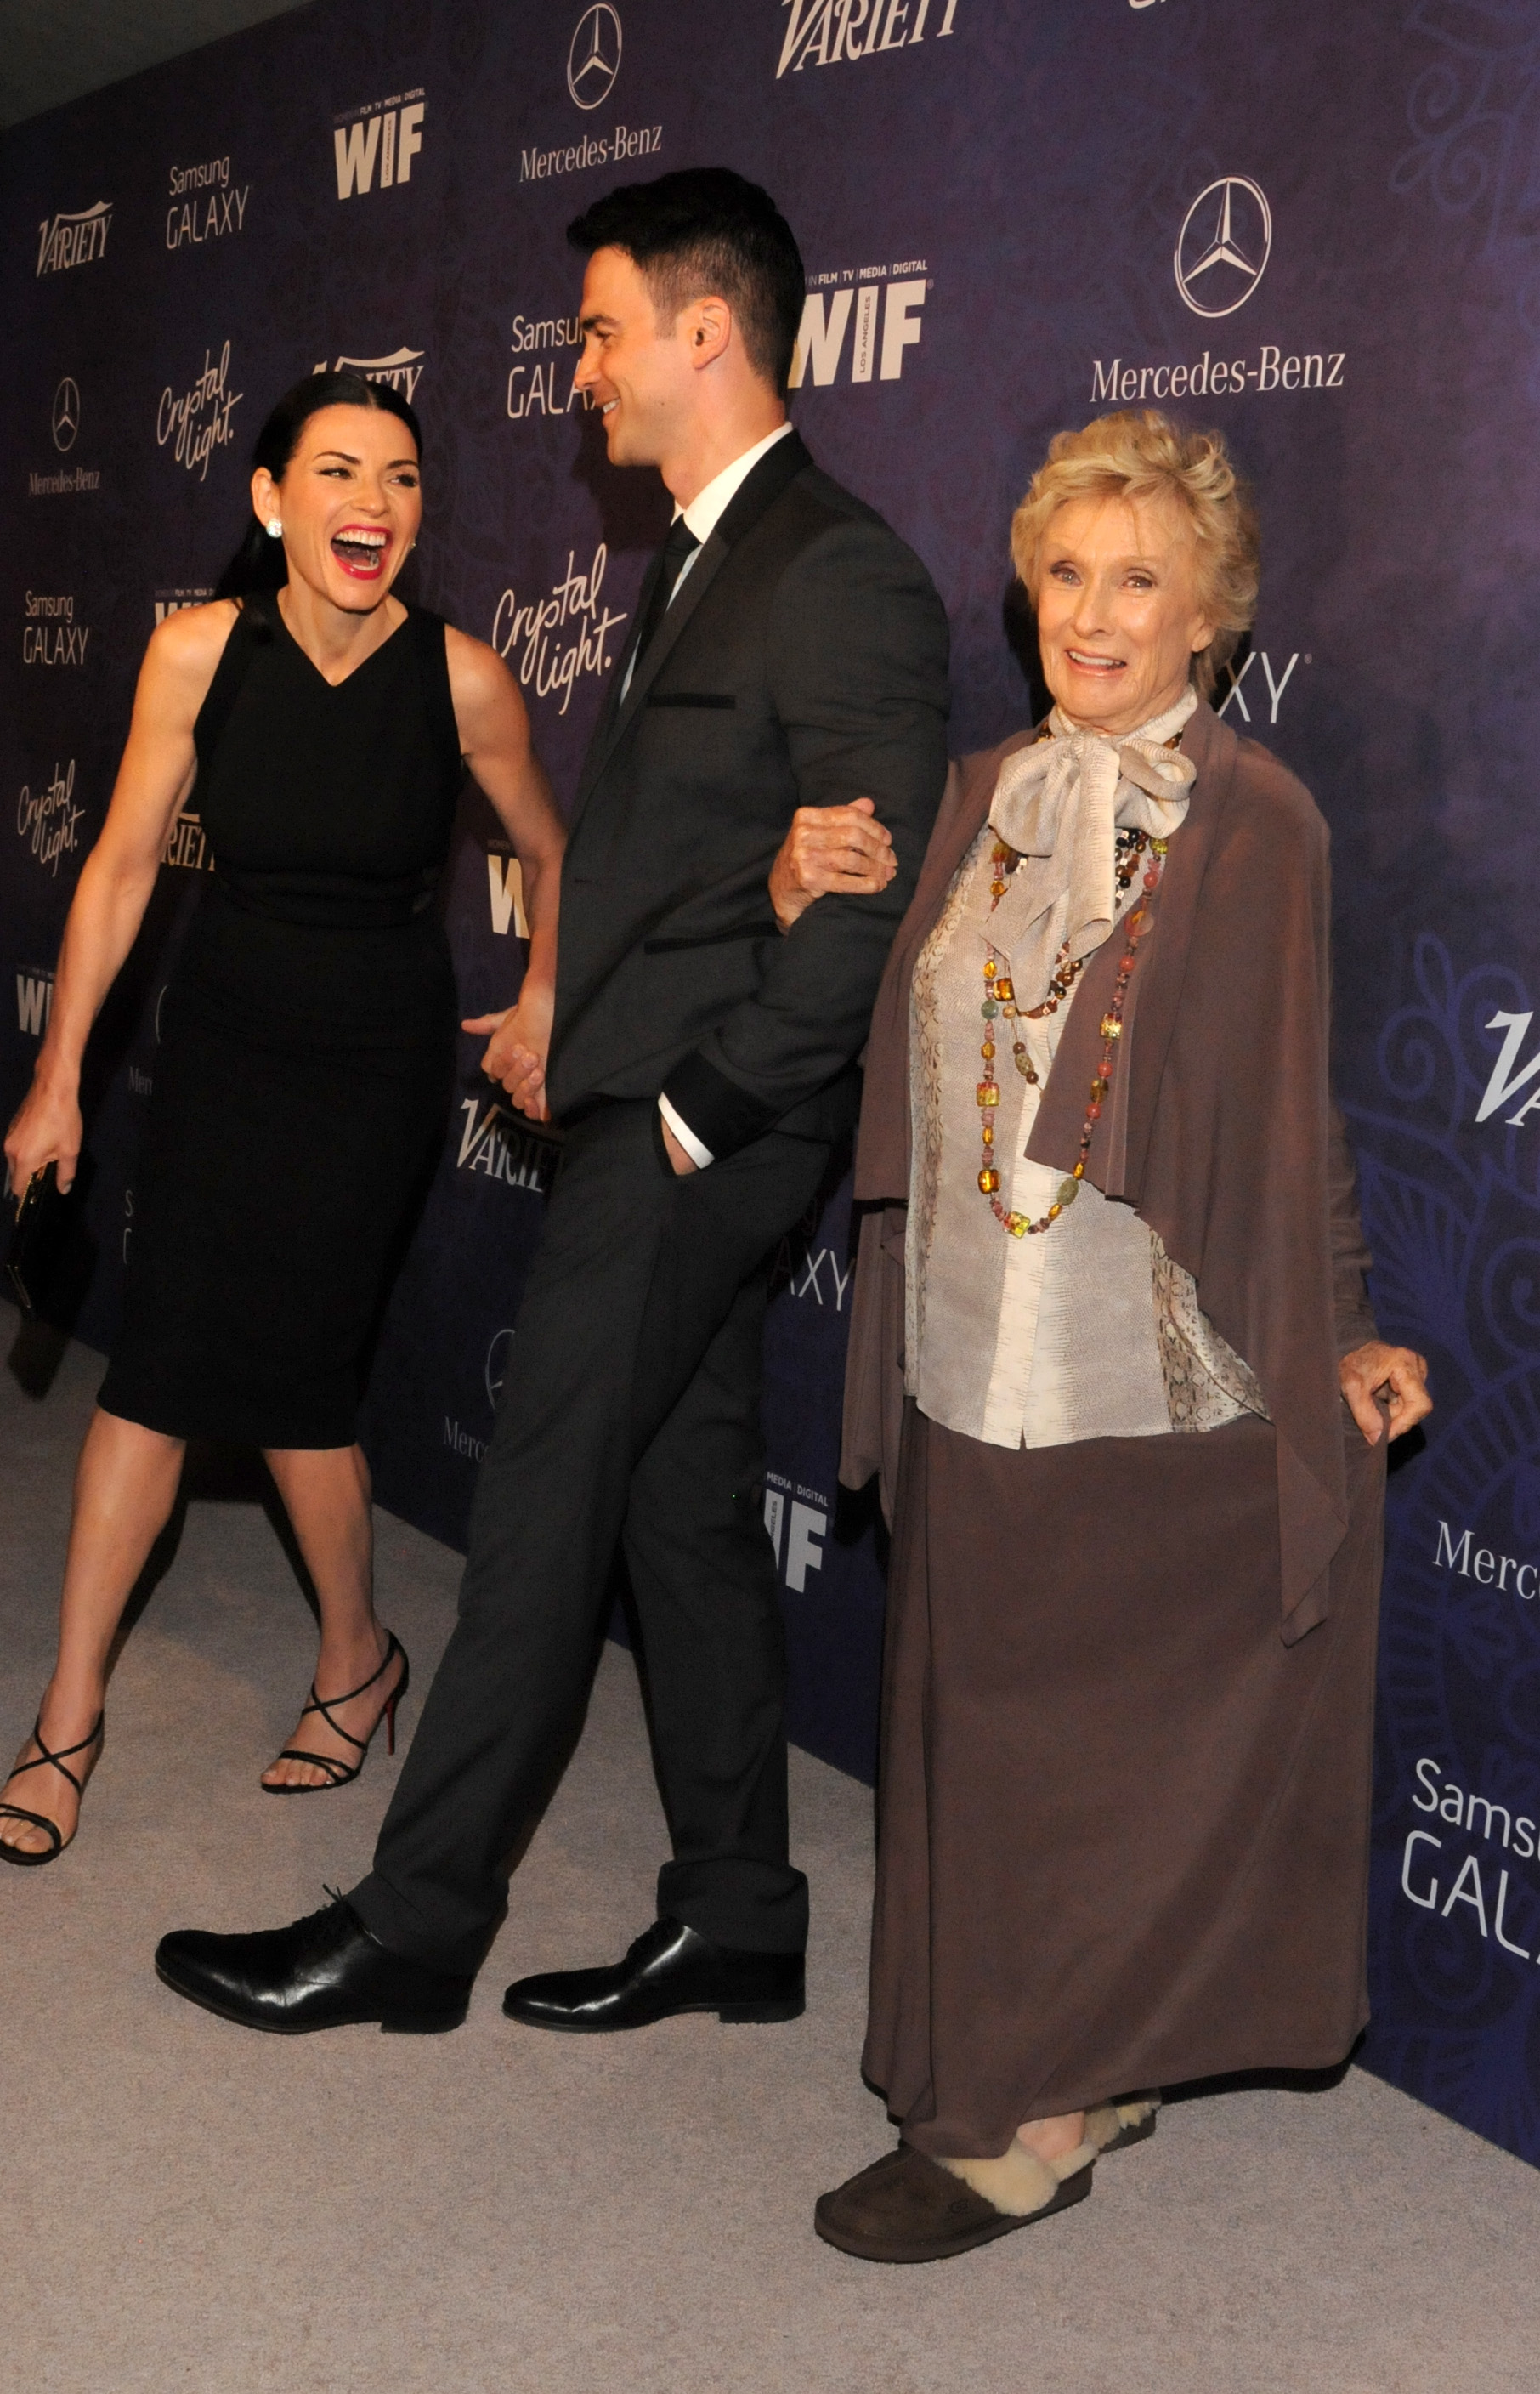 Actress Julianna Margulies, Keith Lieberthal and actress Cloris Leachman - Variety And Women In Film Emmy Nominee Celebration Powered By Samsung Galaxy 